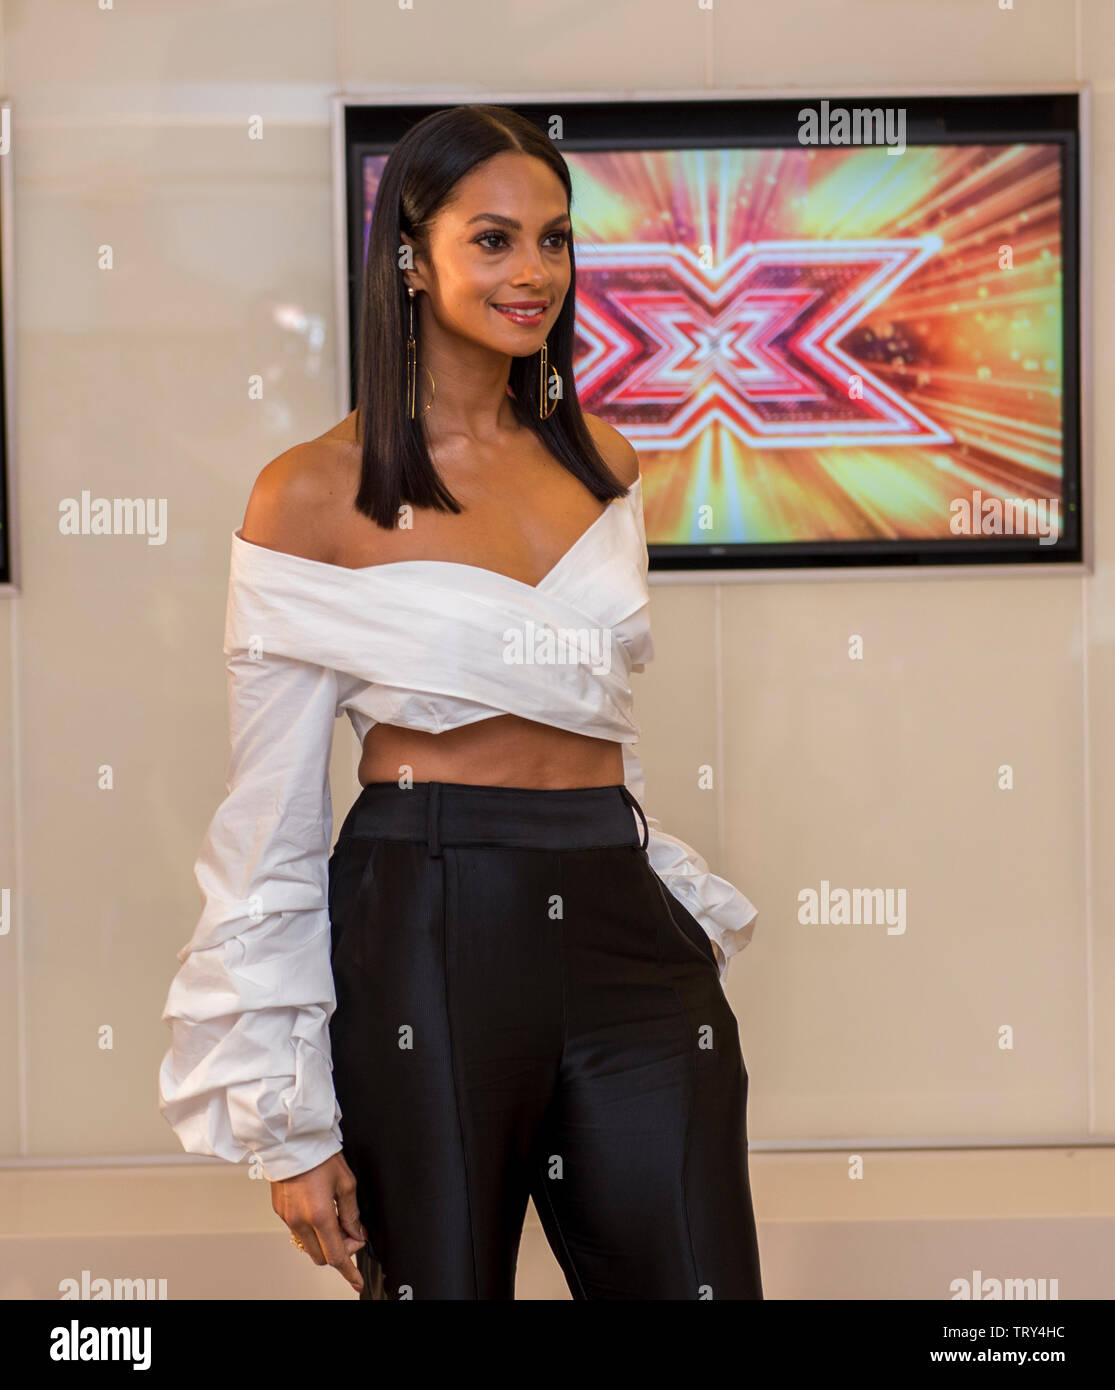 EDINBURGH, SCOTLAND - JUNE 28: Alesha Dixon attends the X Factor auditions at the Assembly Rooms in George Street, Edinburgh, Scotland on June 28 Stock Photo